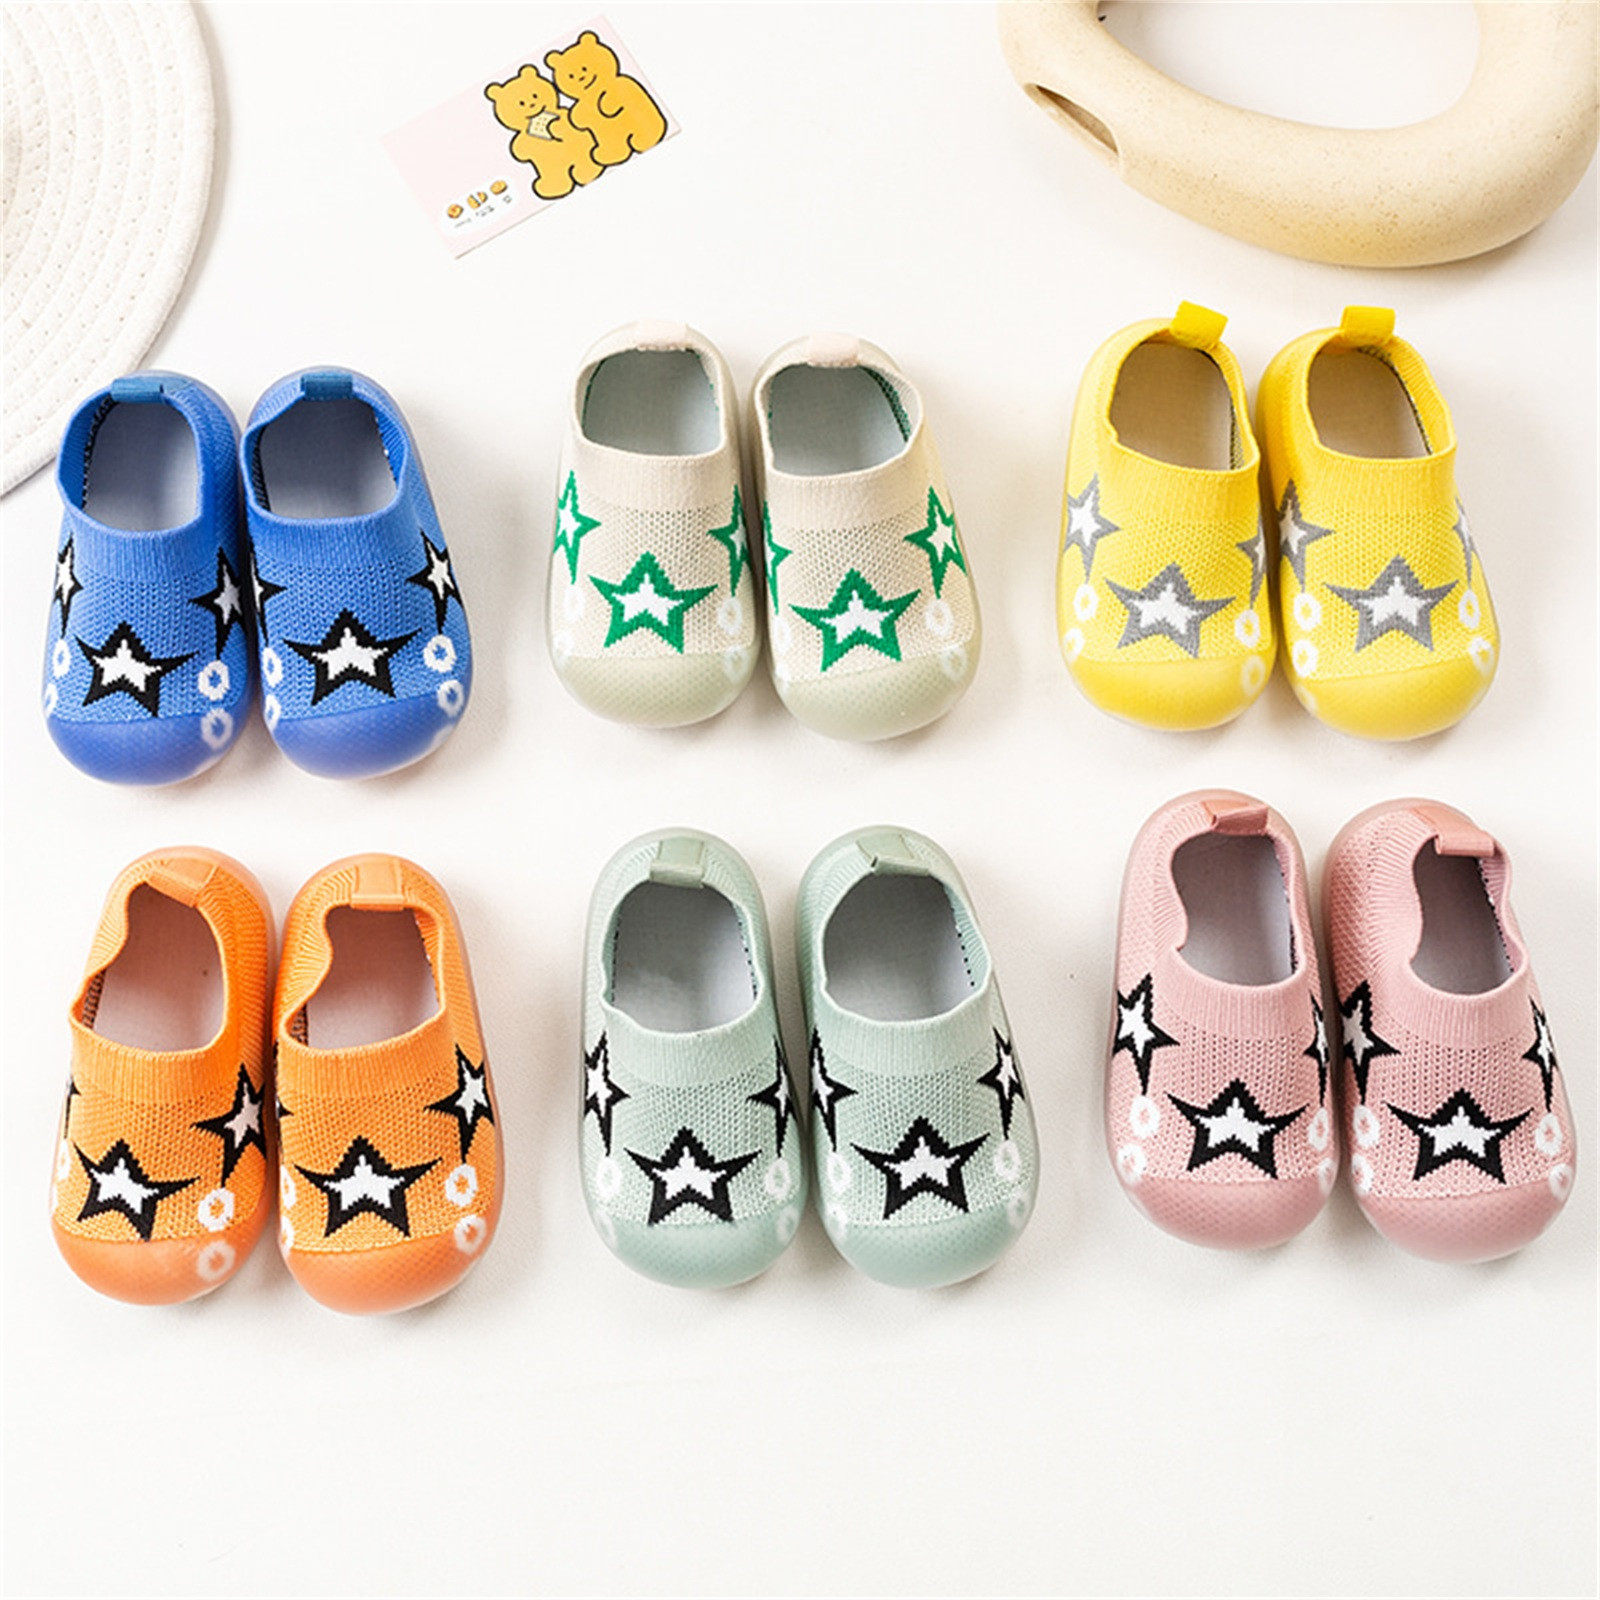 Toddler Kids Infant Newborn Baby Boys Girls Shoes First Walkers Cute